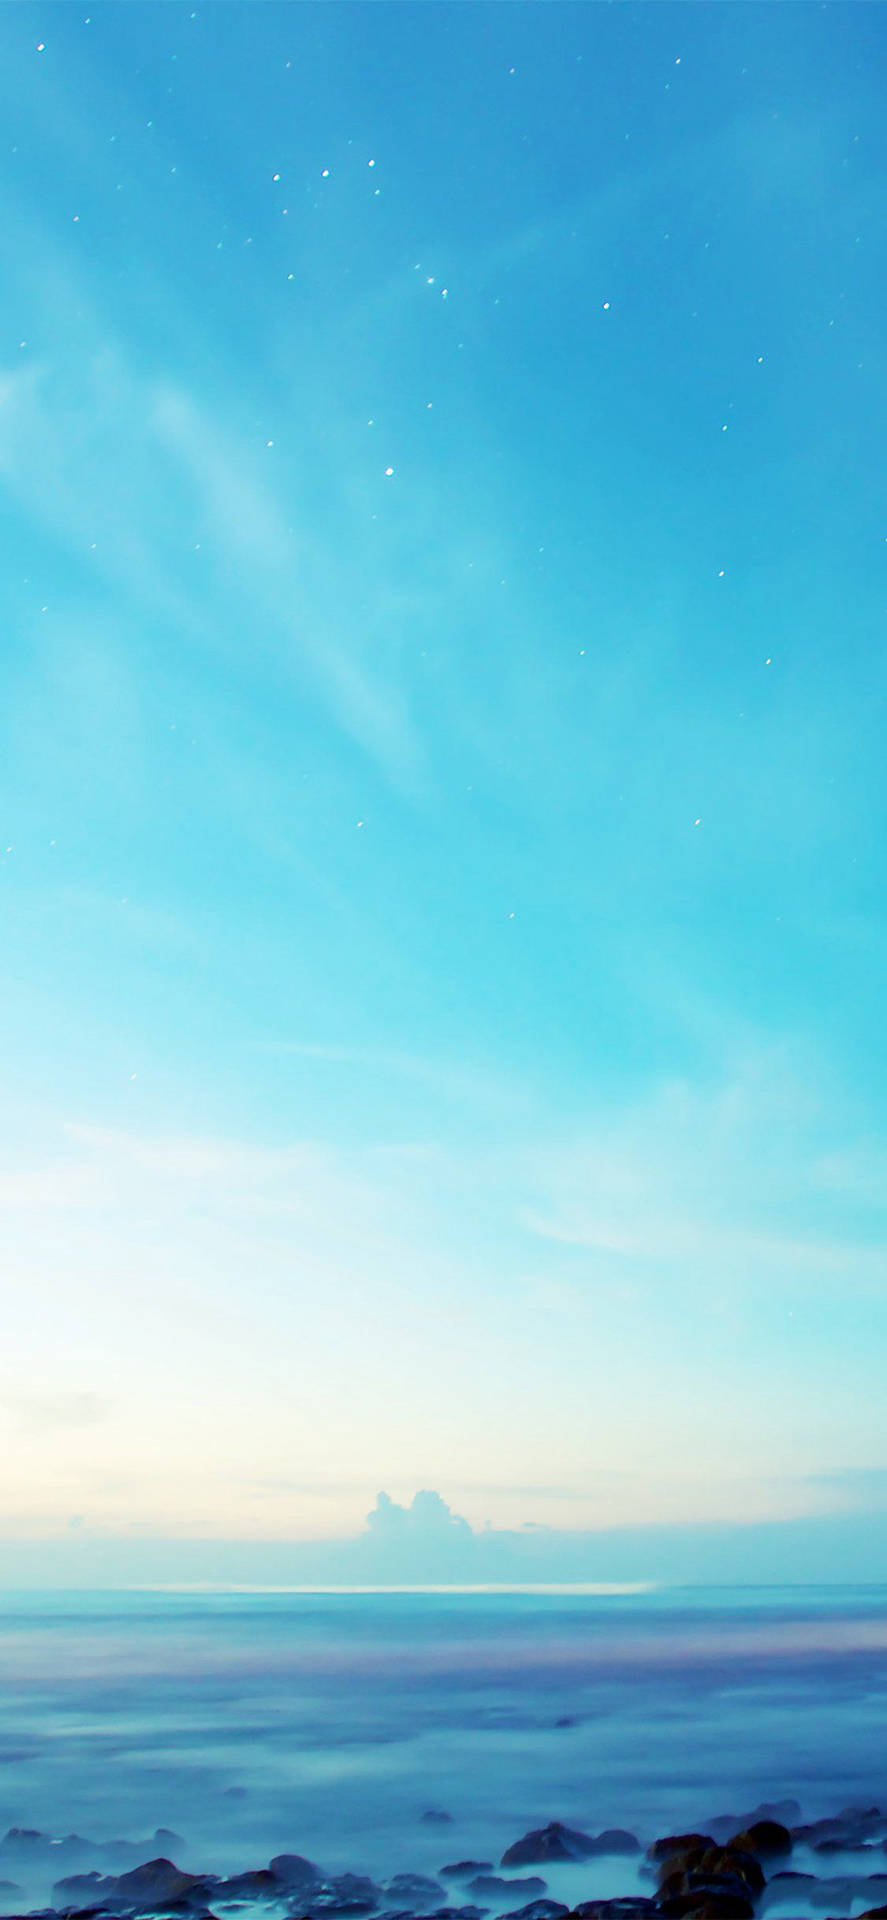 Aesthetic Blue Sky For Iphone Background